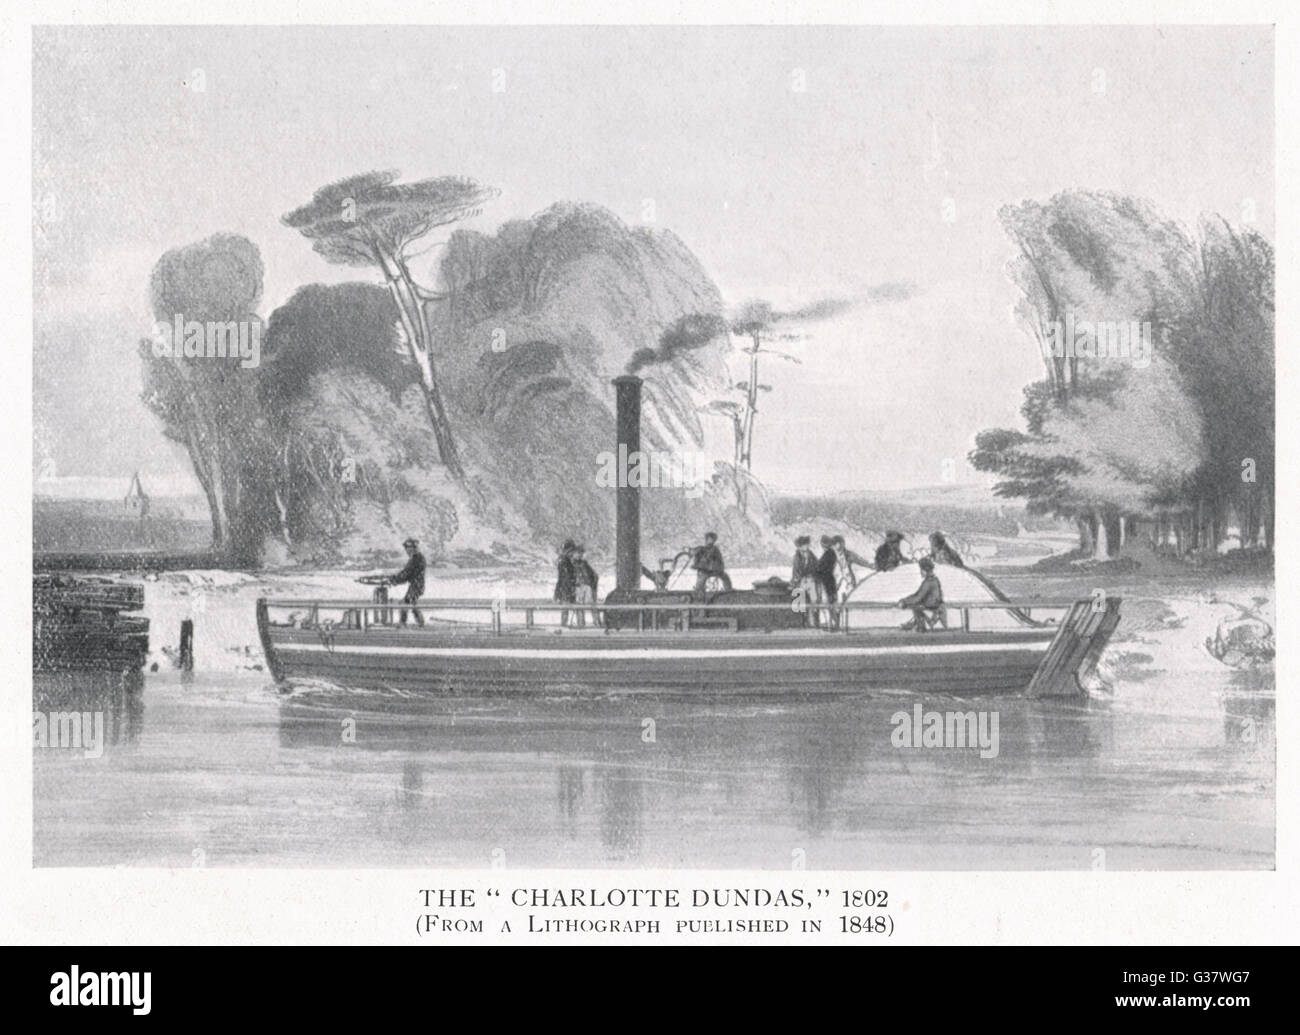 William Symington's 'Charlotte  Dundas', the first practical  steamboat ; sadly, his plans  were not taken up and he died  in poverty      Date: 1802 Stock Photo